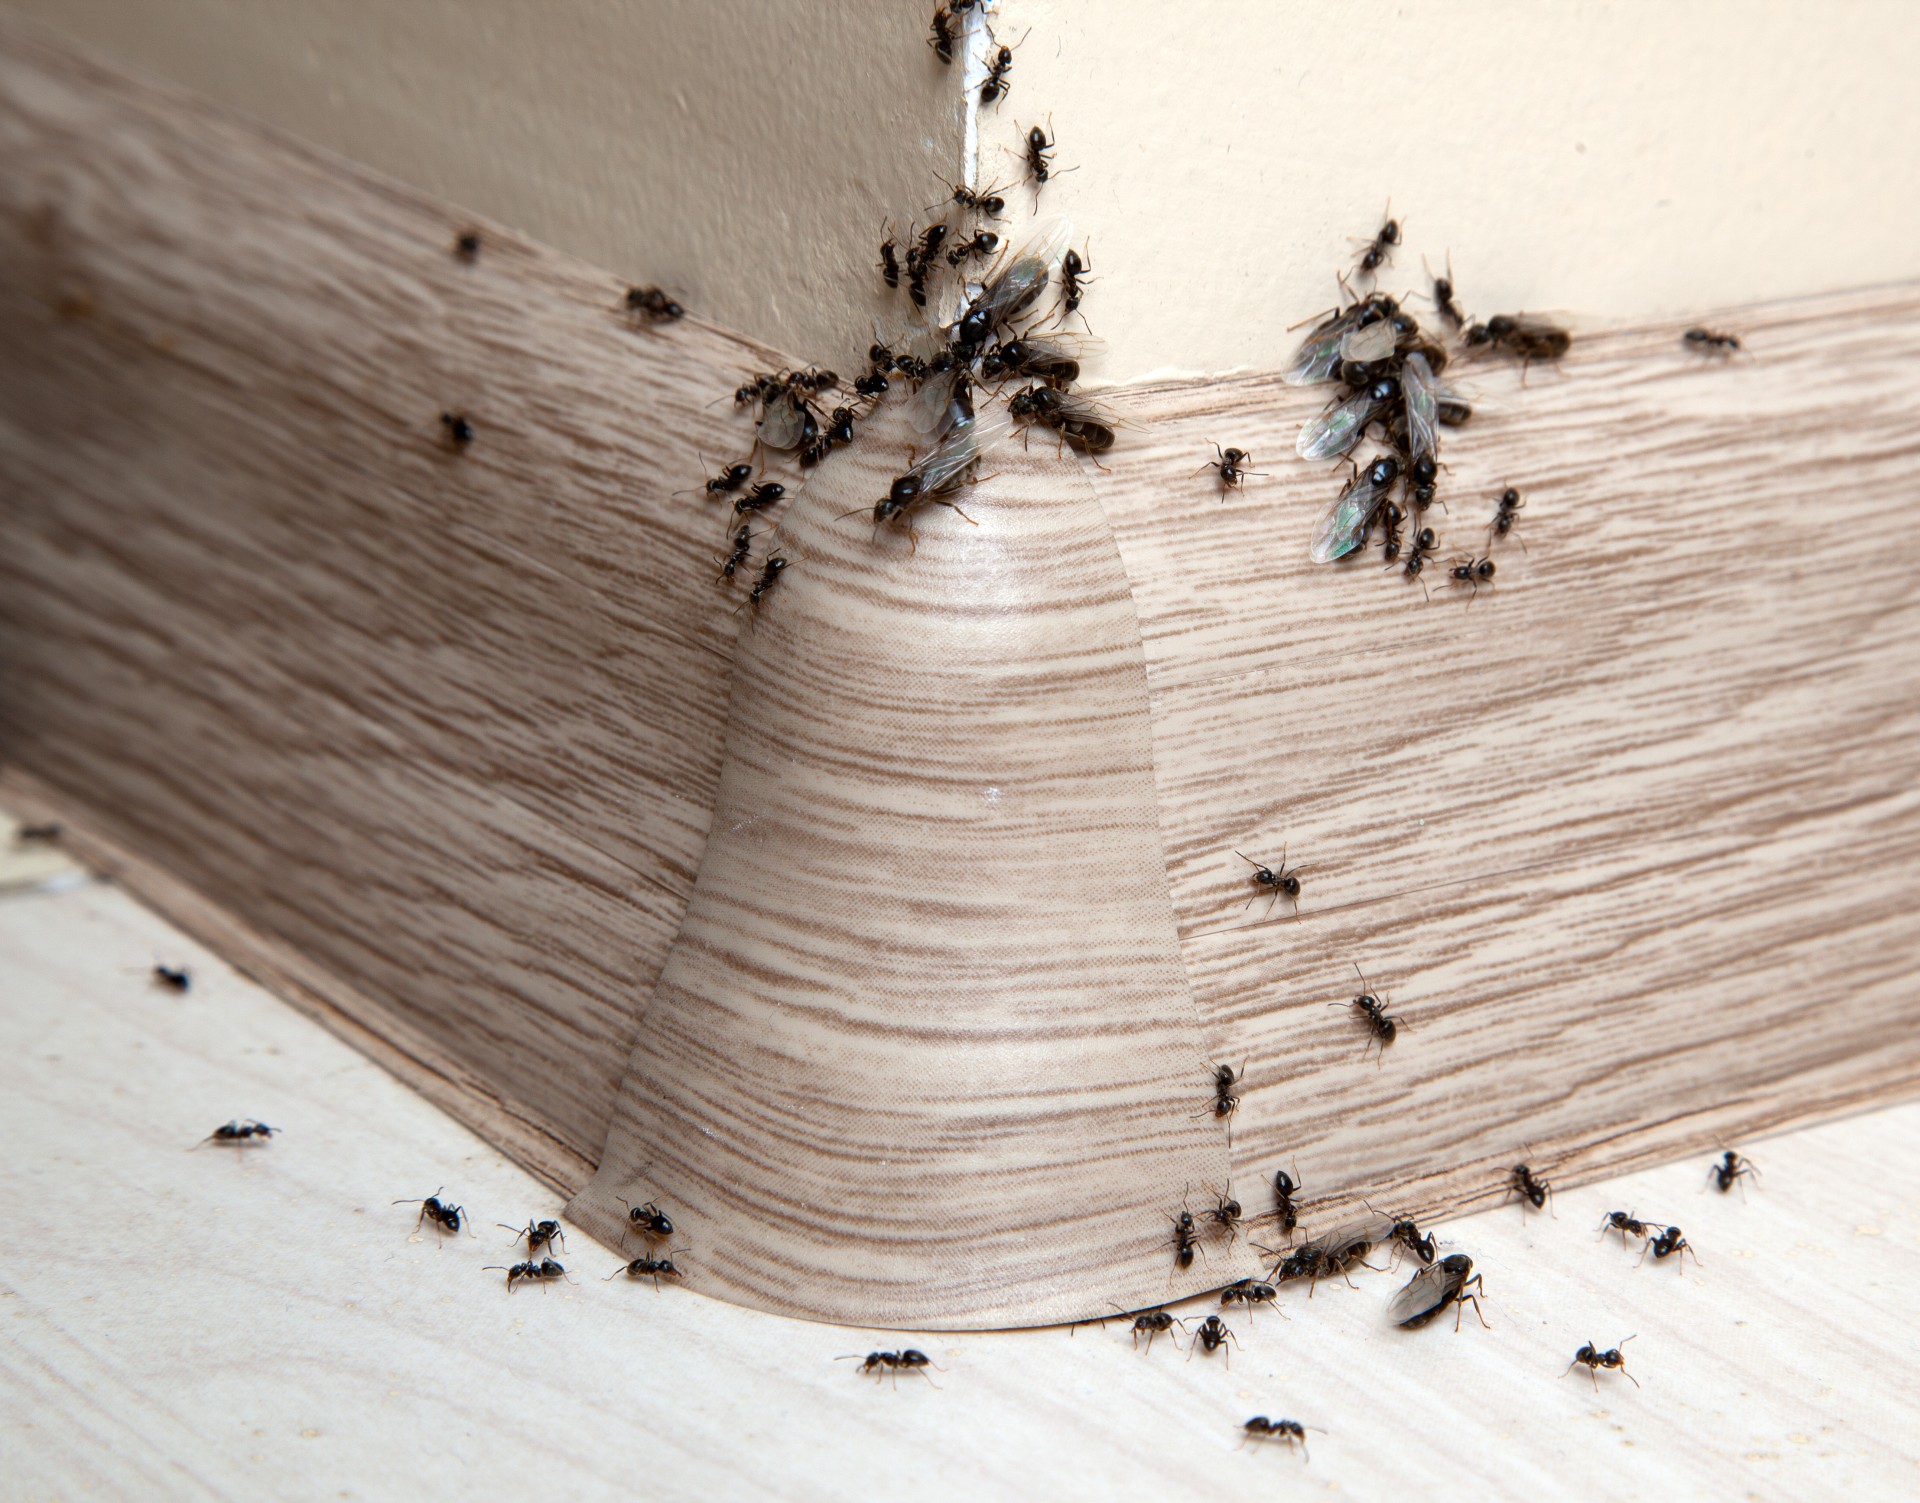 Ant Infestation, Pest Control in Hounslow, Lampton, TW3. Call Now 020 8166 9746